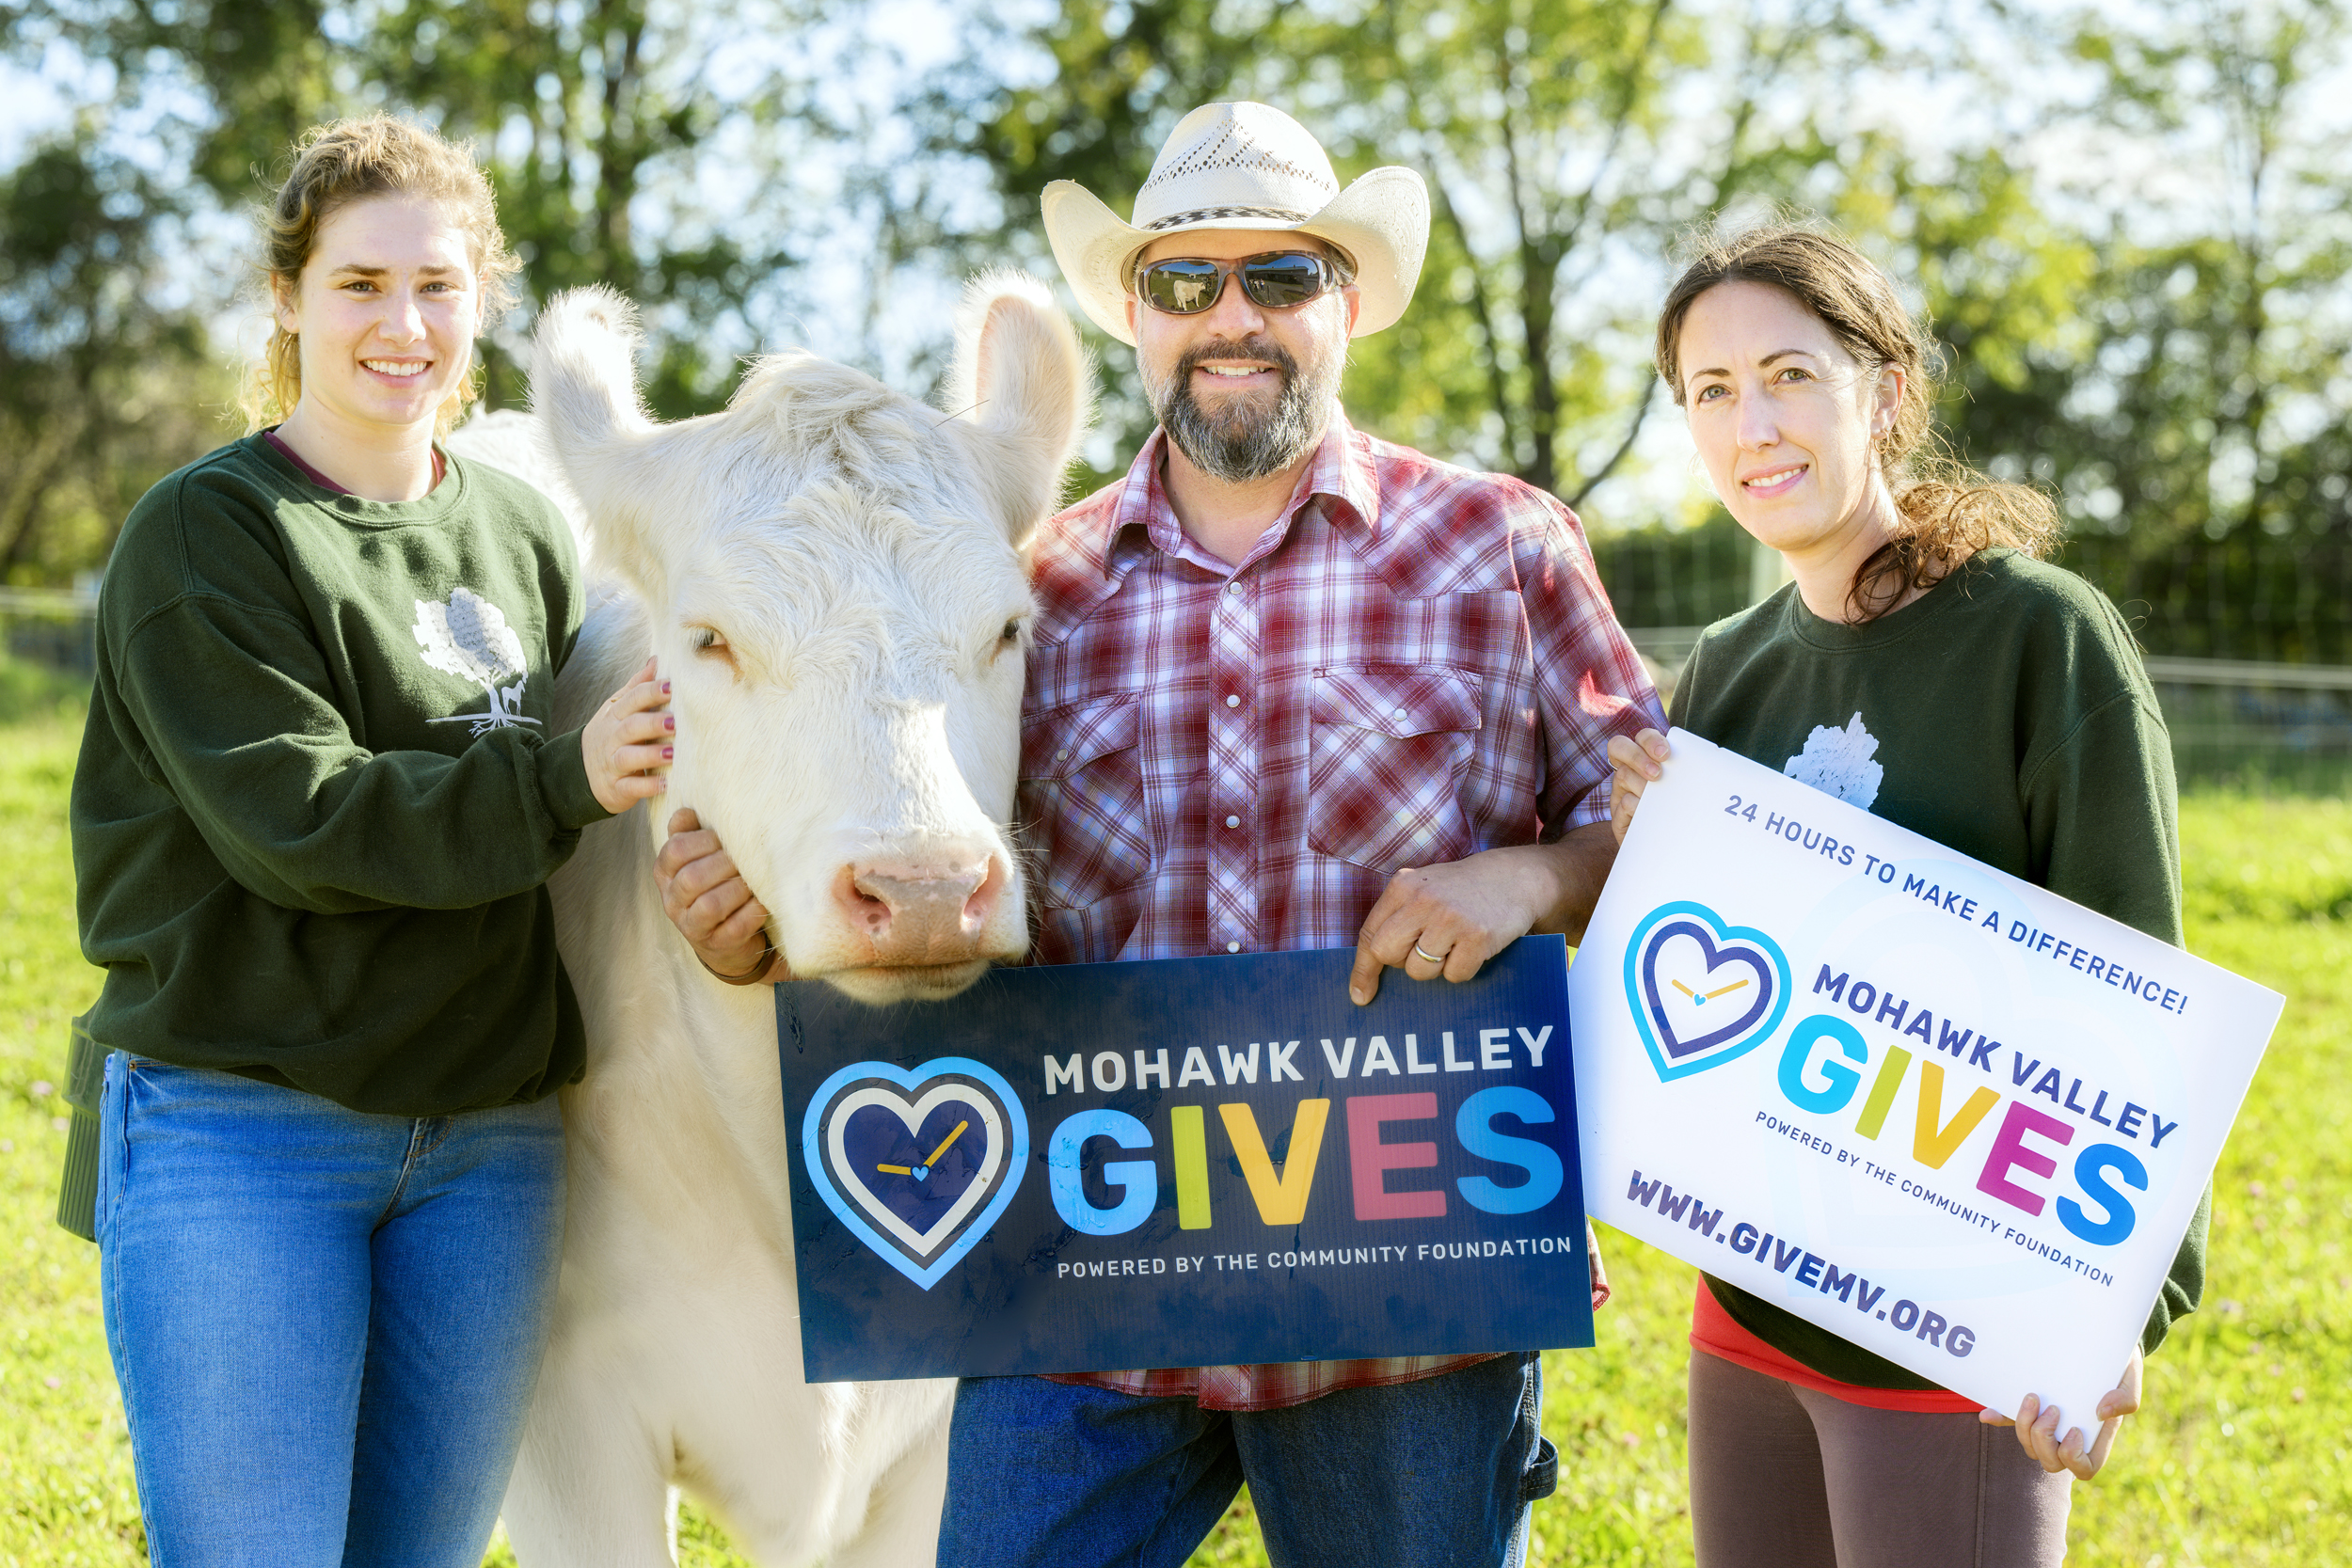 Community Foundation to Host Third-Annual 24-hour Giving Day to Support Nonprofits